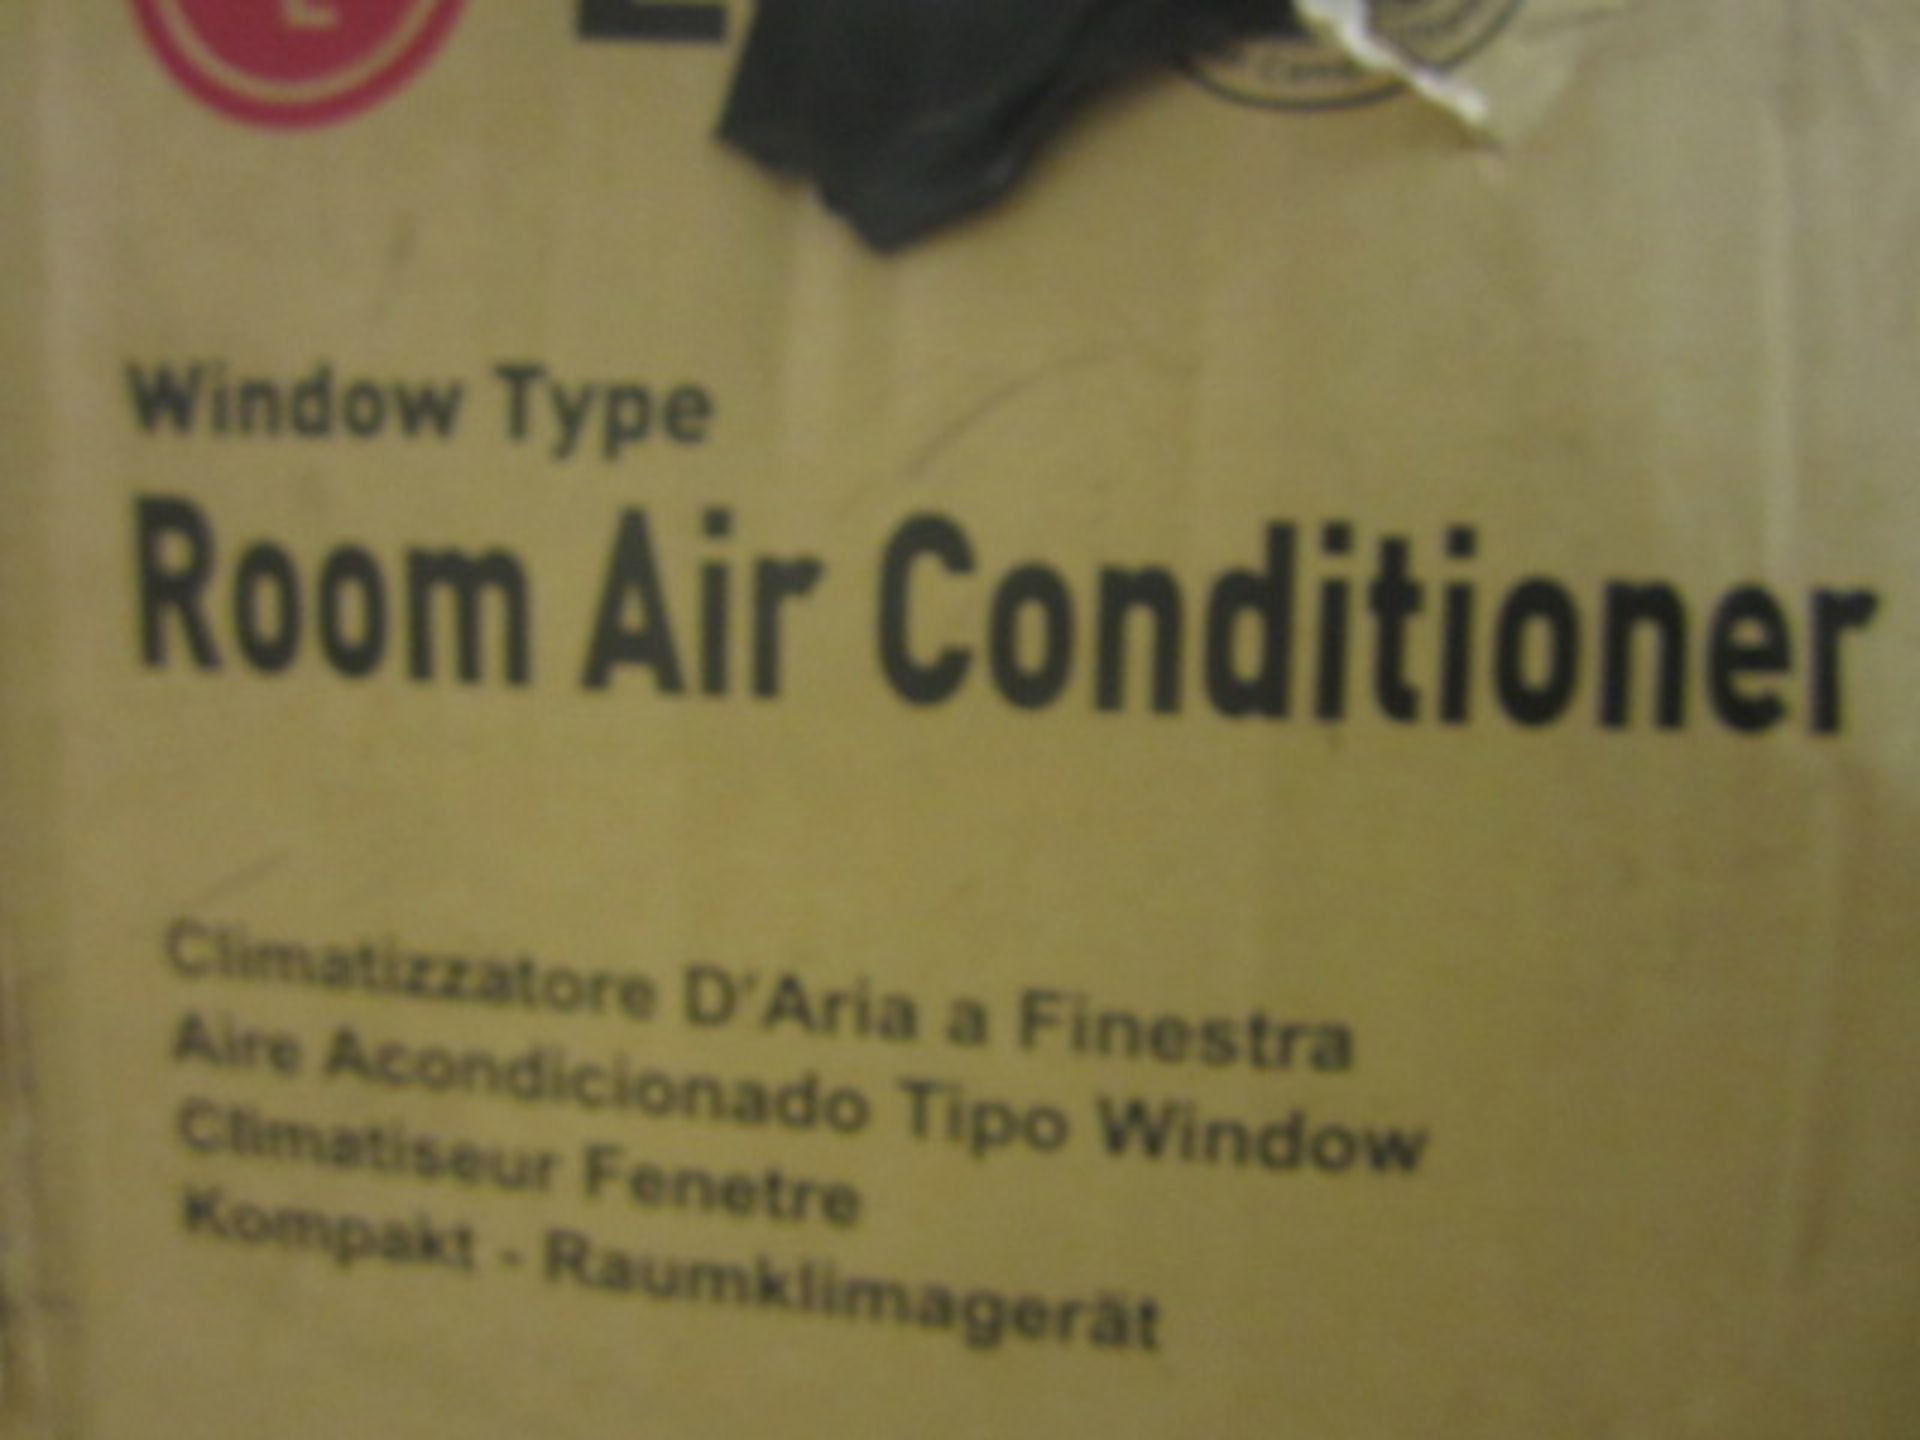 LG window type room air conditioning unit, model W09AC, 240v - Image 2 of 2